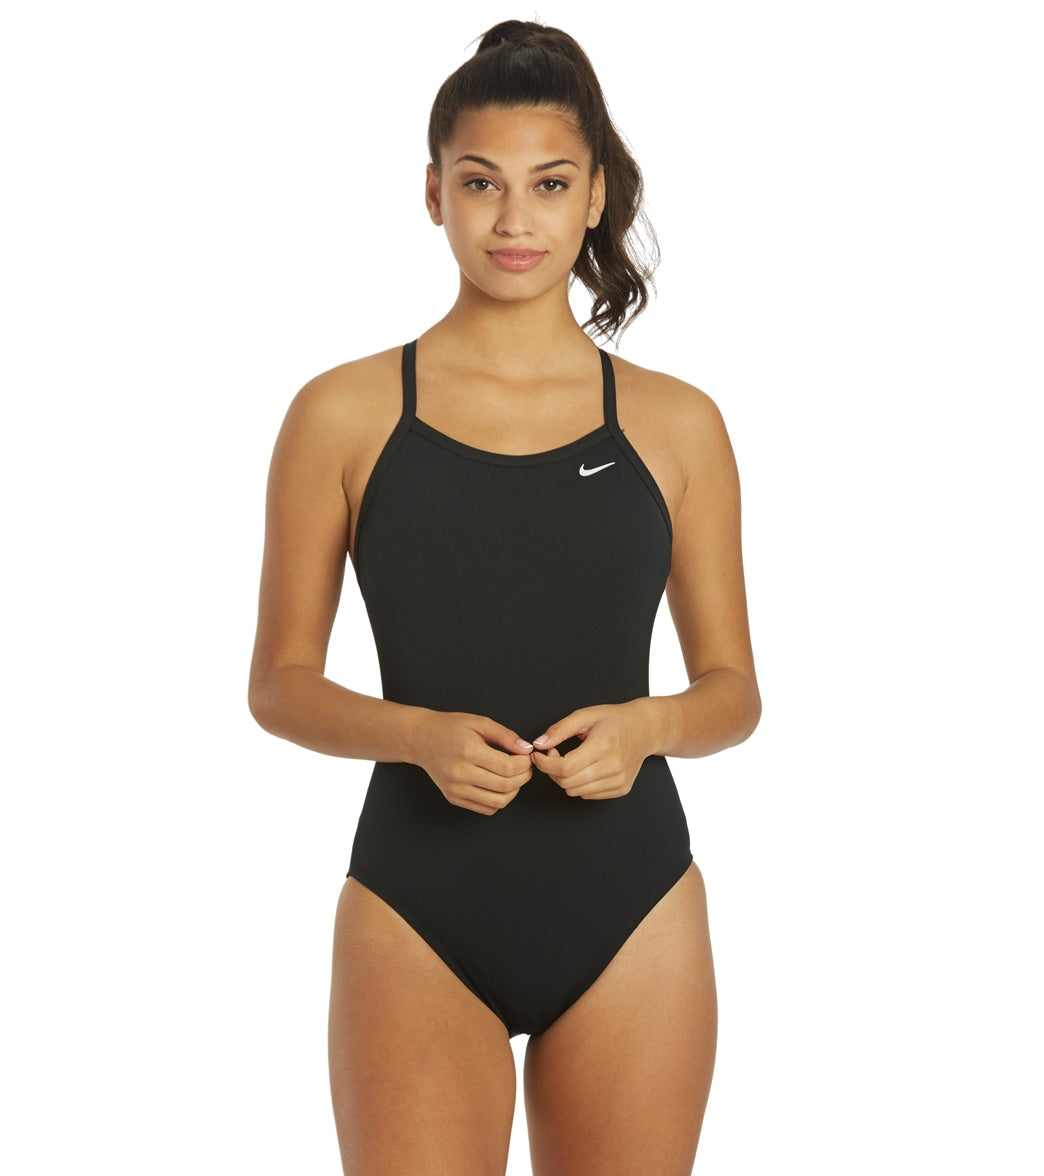 Women's Solid Poly Racer Back Piece Swimsuit at SwimOutlet.com